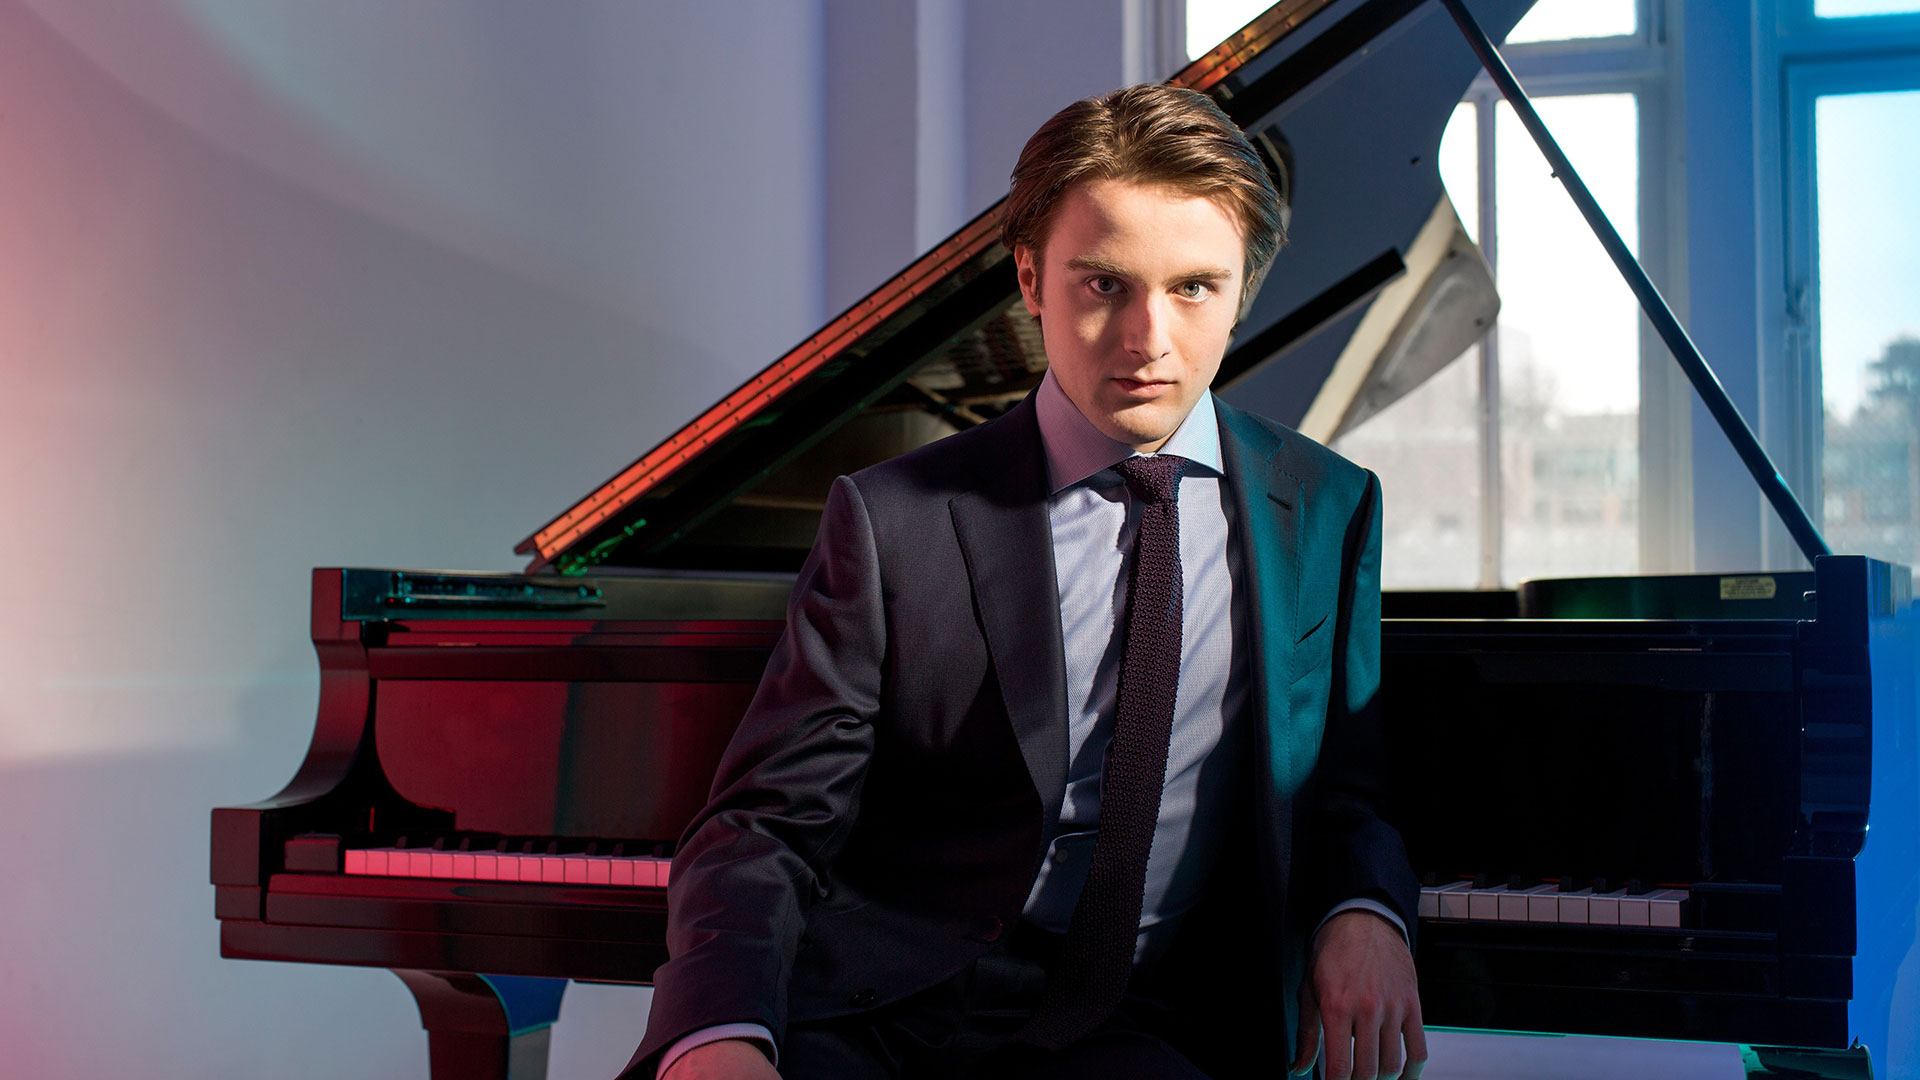 Daniil Trifonov, the Russian pianist who returns for a season-long residency, including a performance of Rachmaninoff's Concerto No. 3.